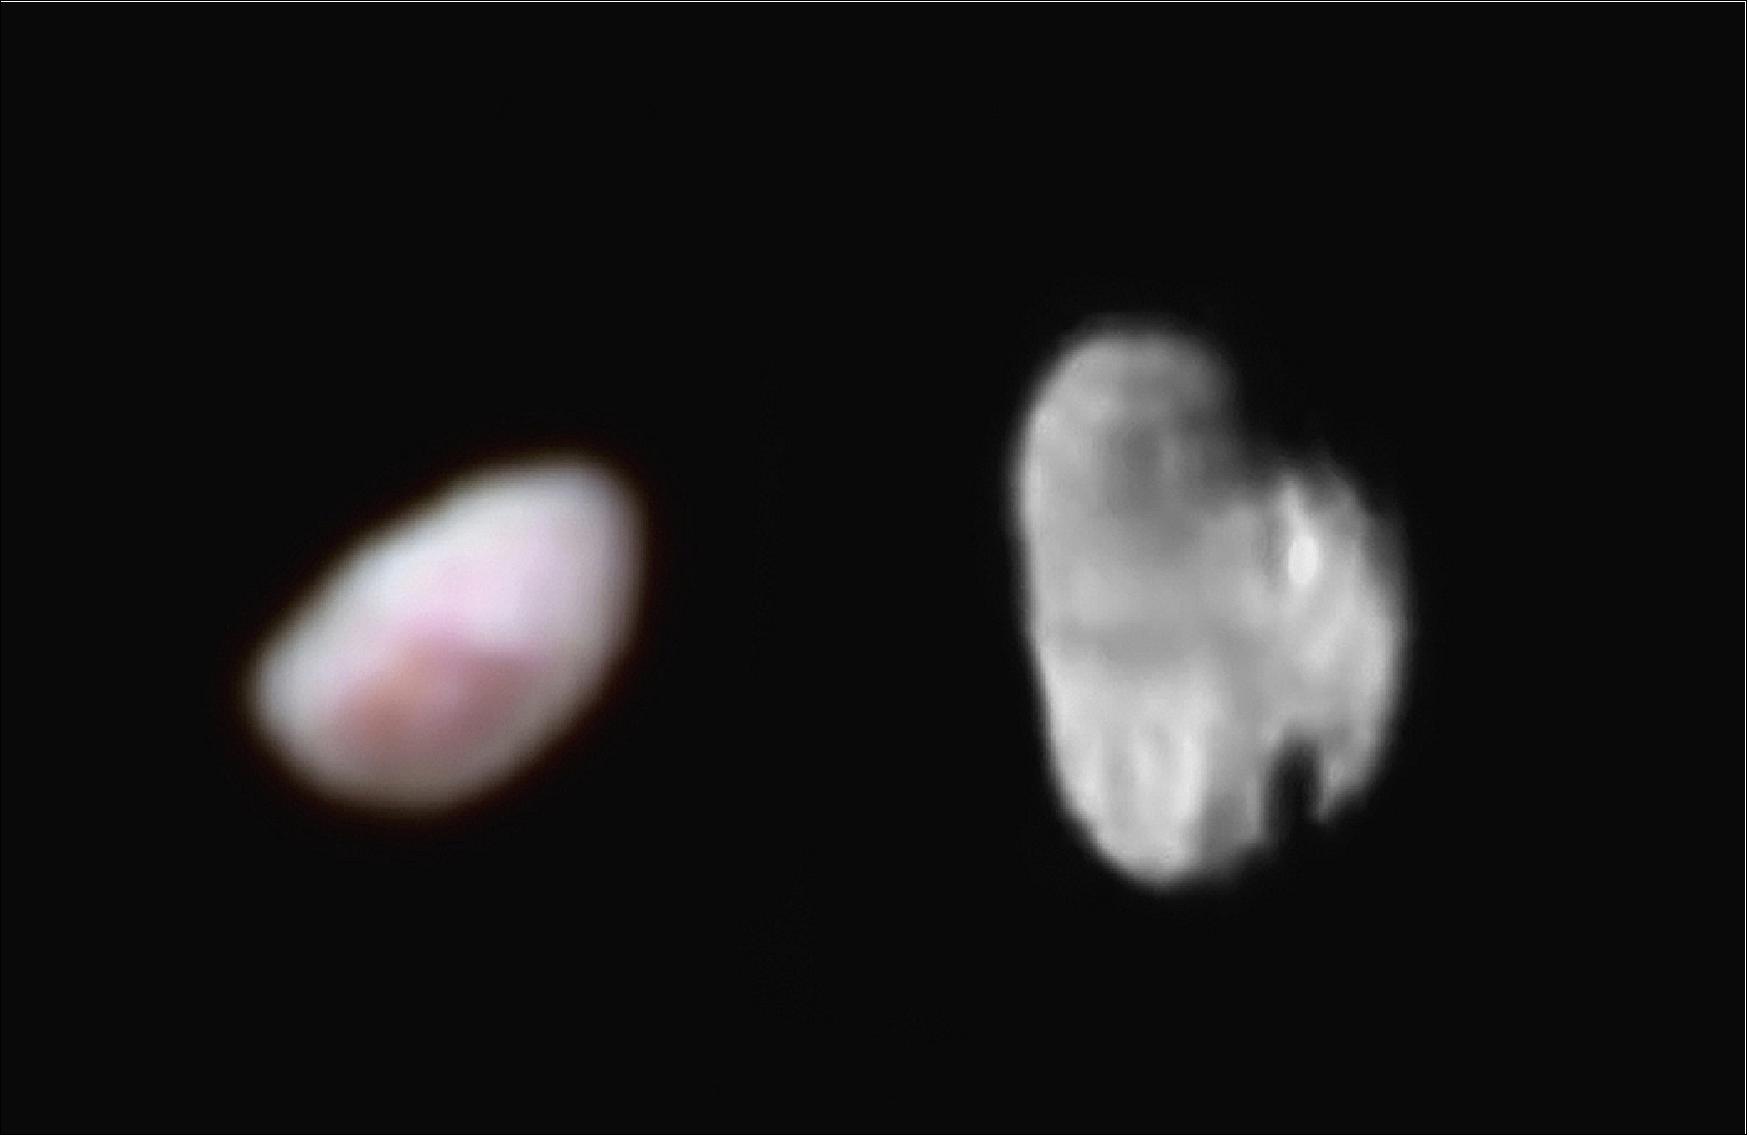 Figure 57: Pluto's moon Nix (left), shown here in enhanced color as imaged by the New Horizons Ralph instrument, has a reddish spot that has attracted the interest of mission scientists. The data were obtained on the morning of July 14, 2015, and received on the ground on July 18. At the time the observations were taken New Horizons was about 165,000 km from Nix. The image shows features as small as approximately 3 km across on Nix, which is estimated to be 42 km long and 36 km wide (image credit: NASA, JHU/APL, SWRI) 50)